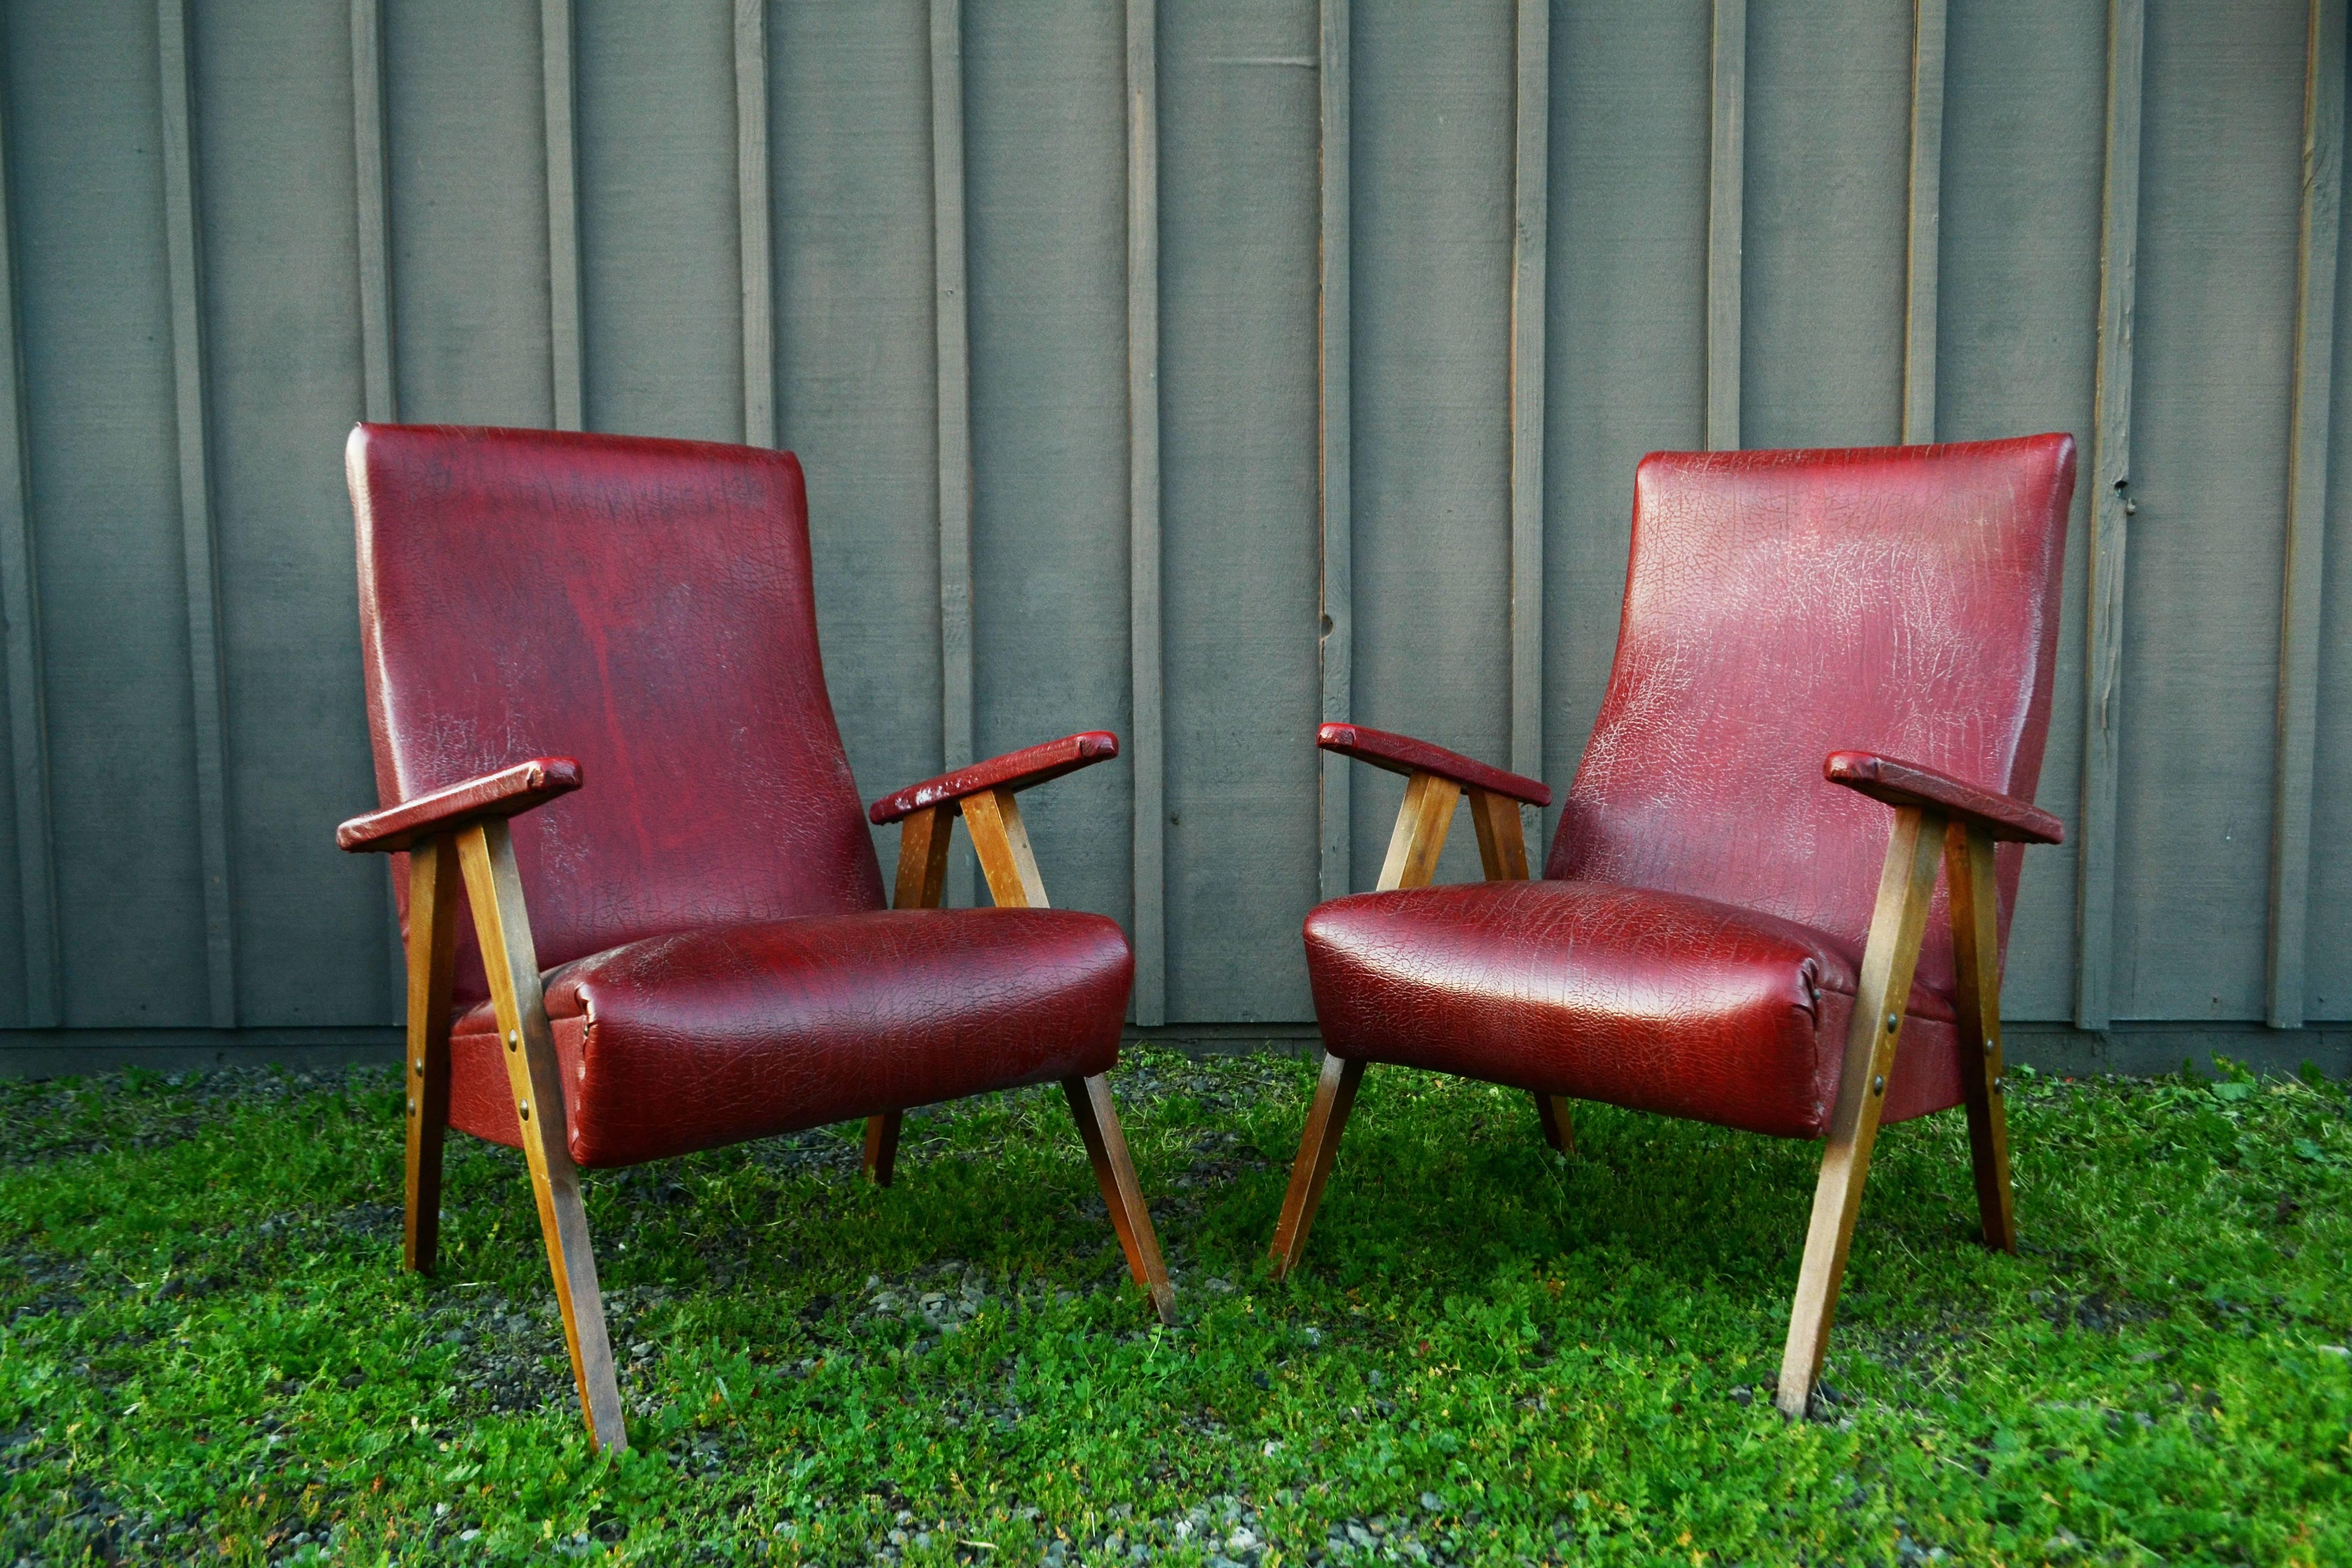 Pair of vintage red leather armchairs with wooden legs and upholstered arms.